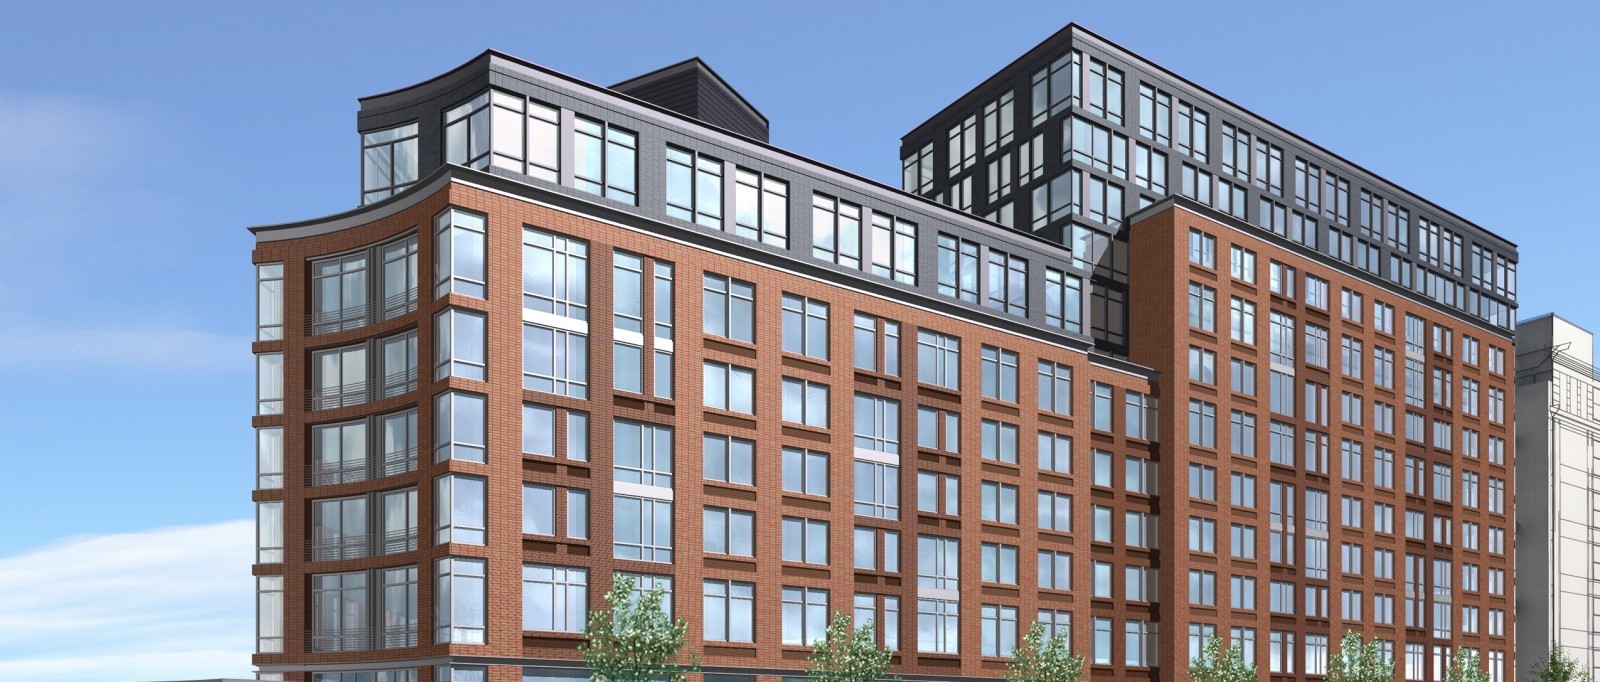 810-834-fulton-street-mixed-use-project-1600x682